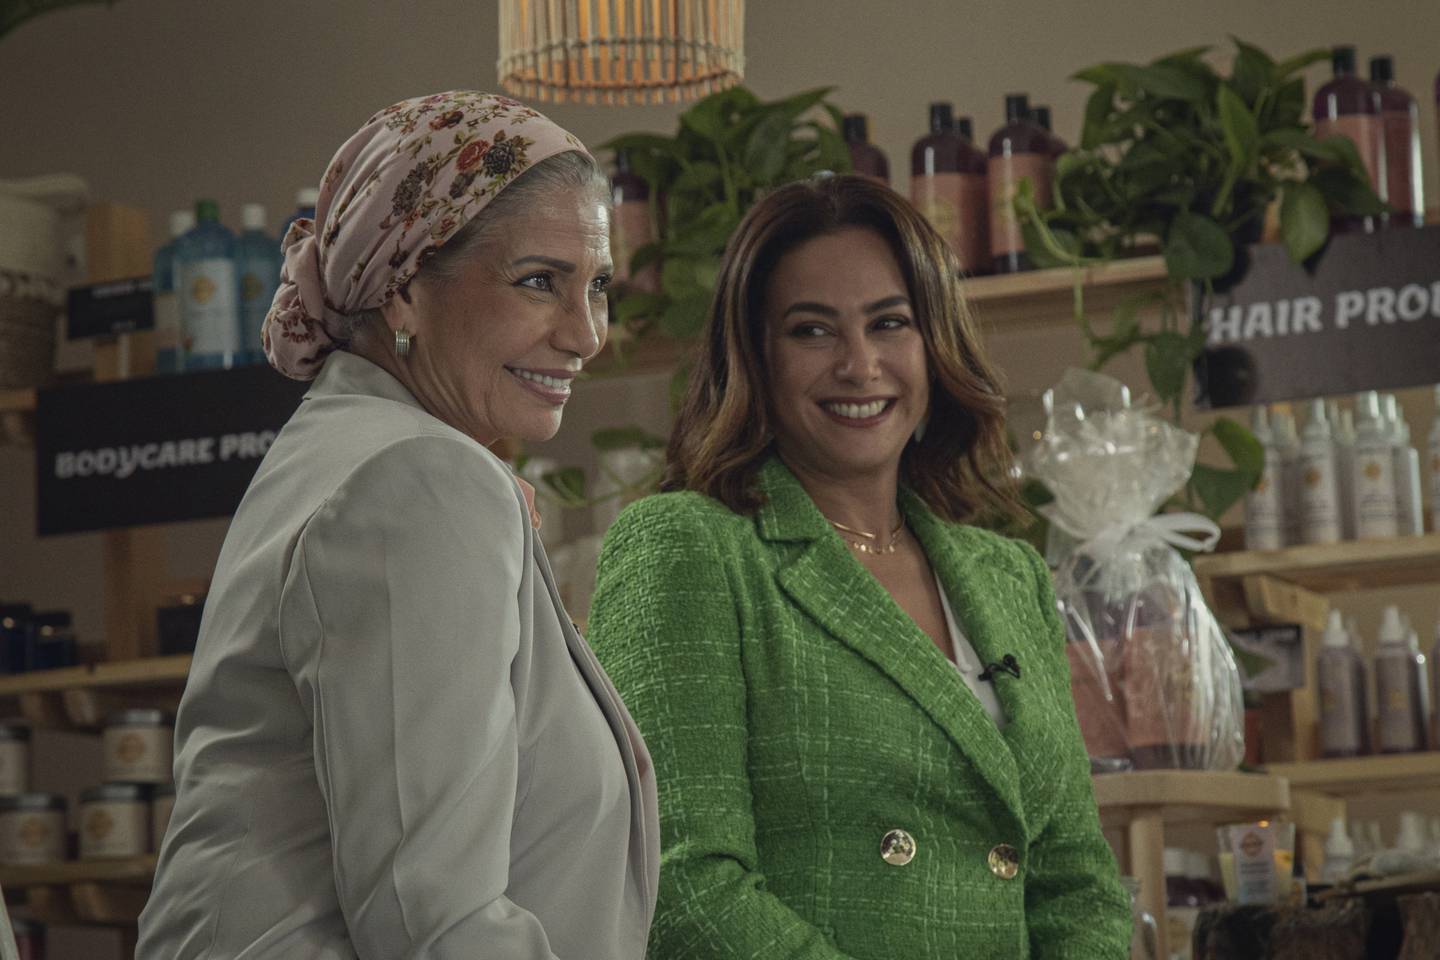 Hend Sabry and Sawsan Badr, left, in 'Finding Ola'. Photo: Netflix